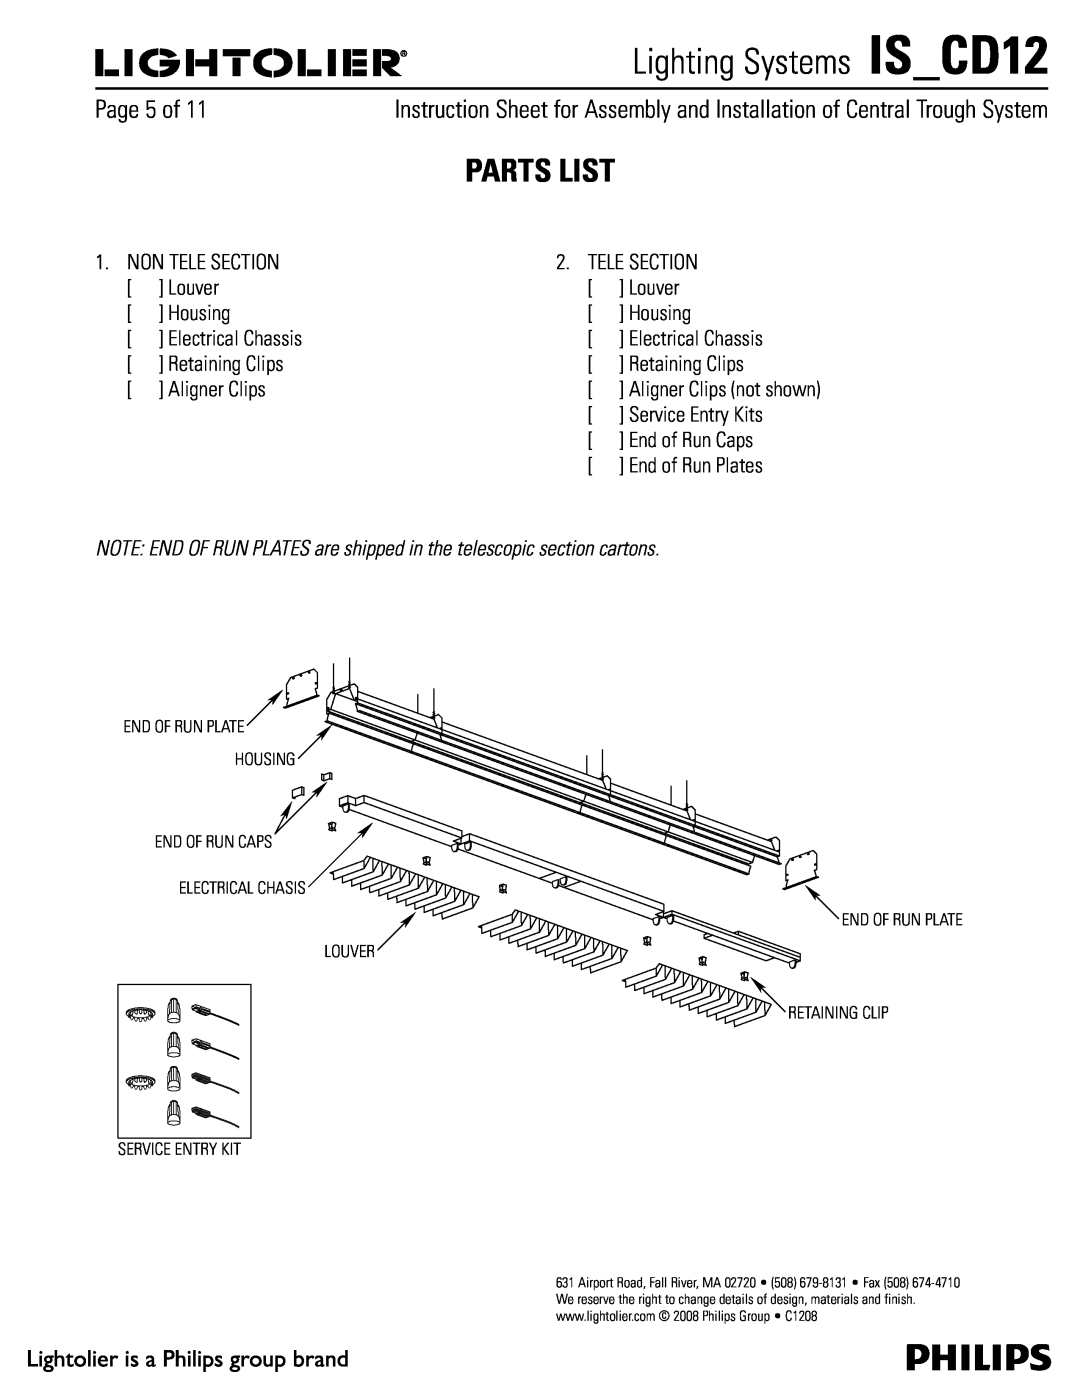 Lightolier IS_CD12 manual Parts List, Lighting Systems IS CD12 